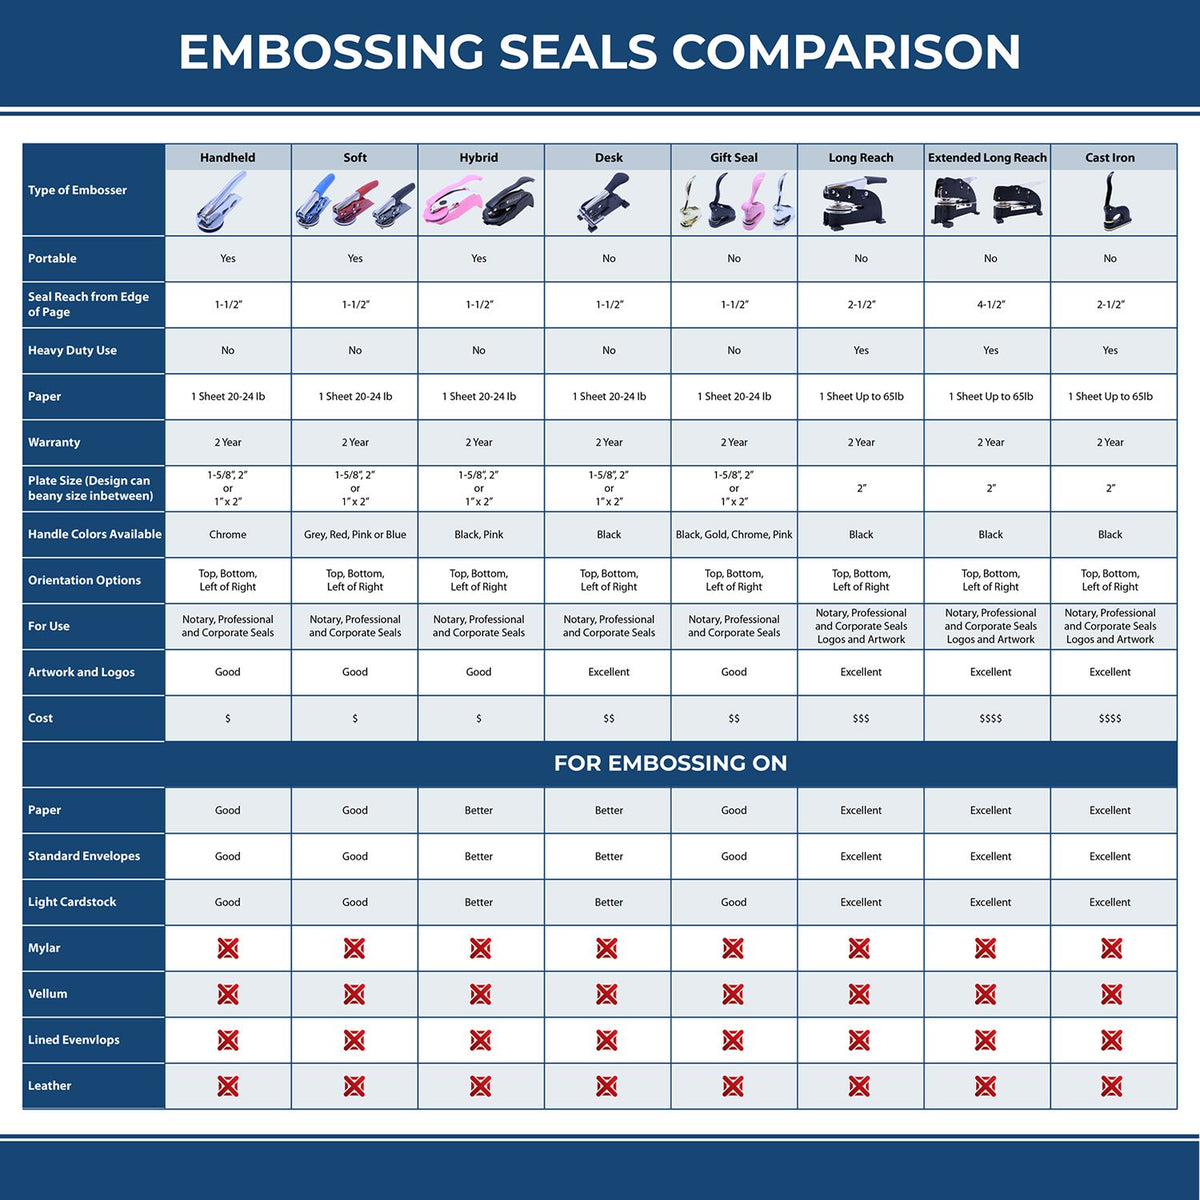 A comparison chart for the different types of mount models available for the Heavy Duty Cast Iron Tennessee Architect Embosser.